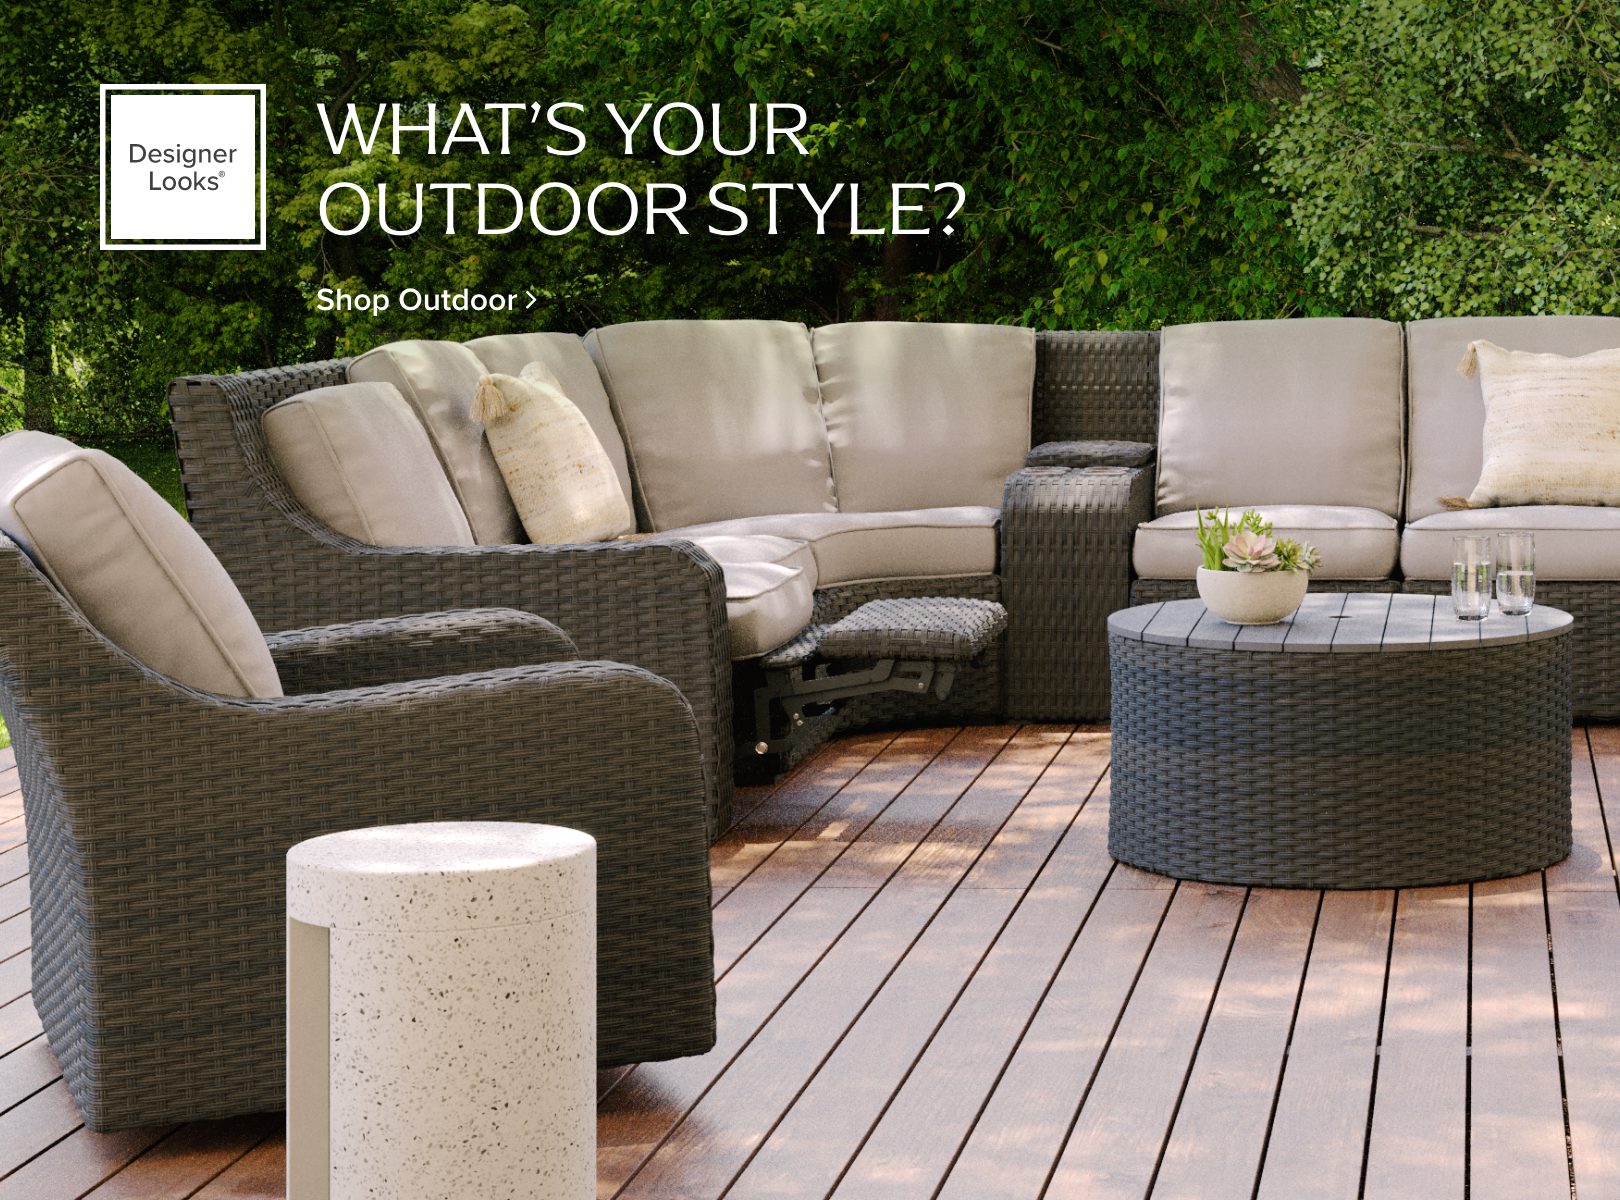 What’s Your Outdoor Style?